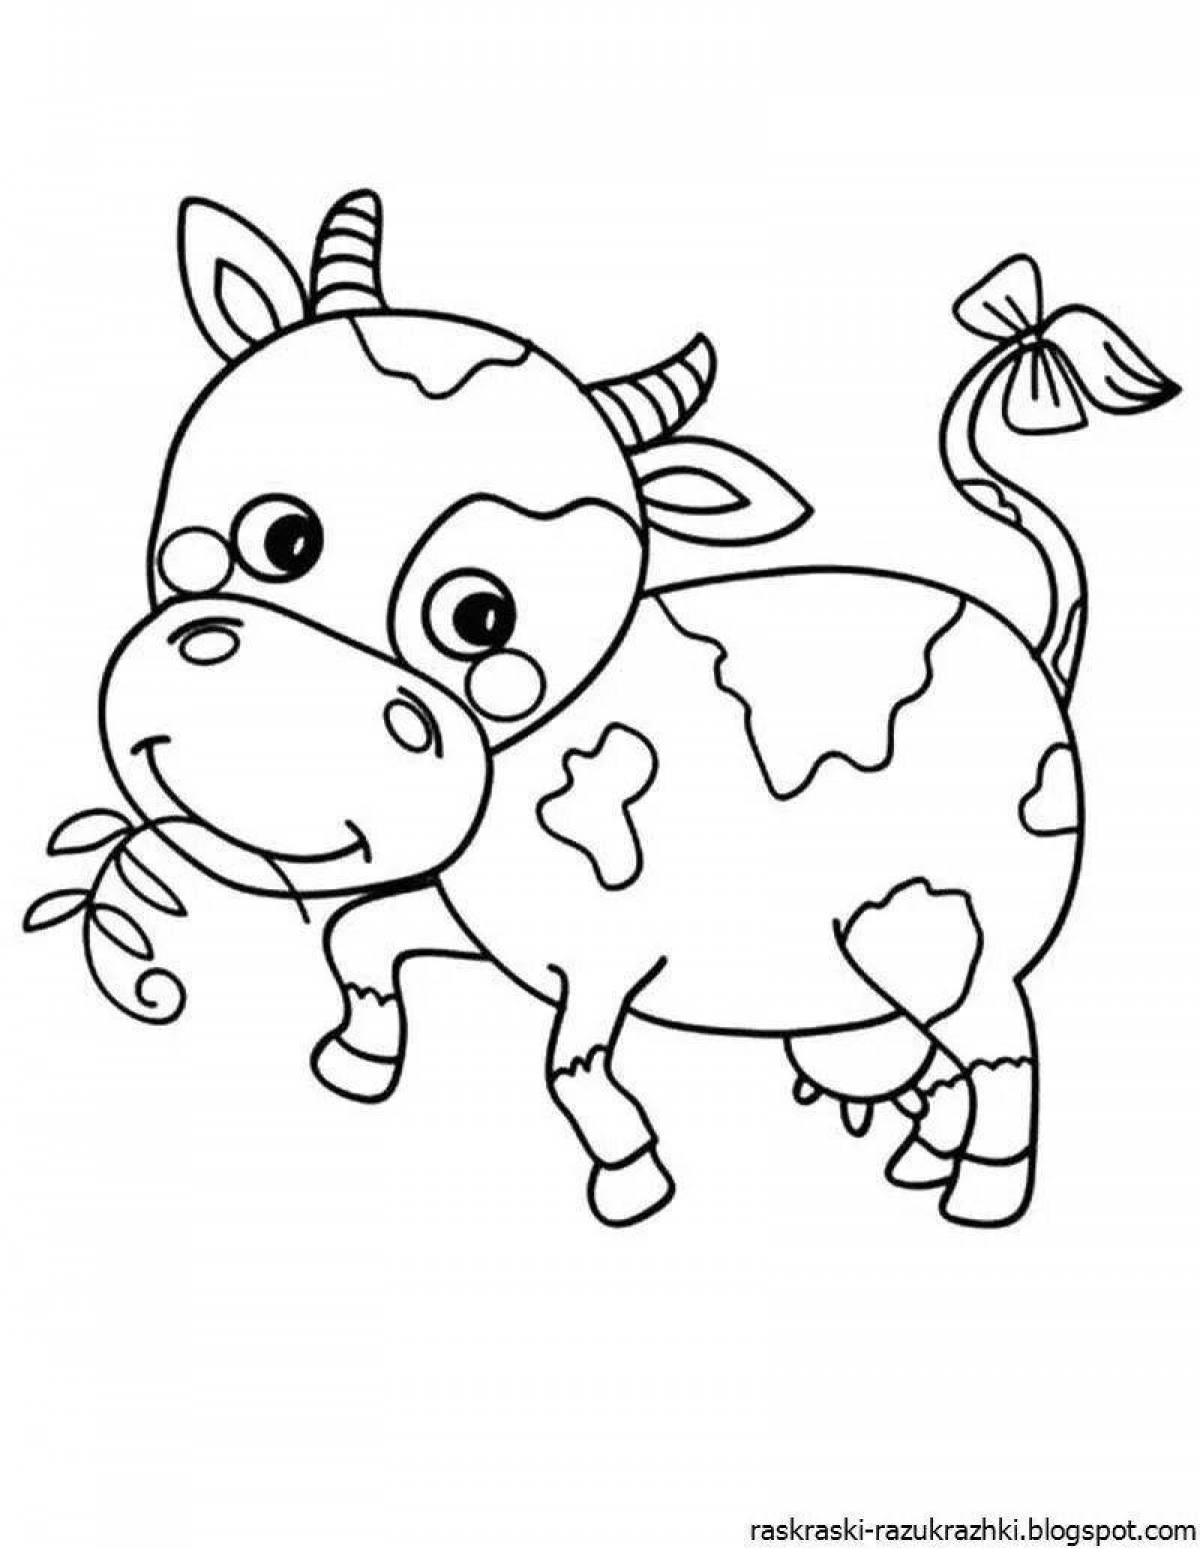 Adorable cow coloring book for 3-4 year olds